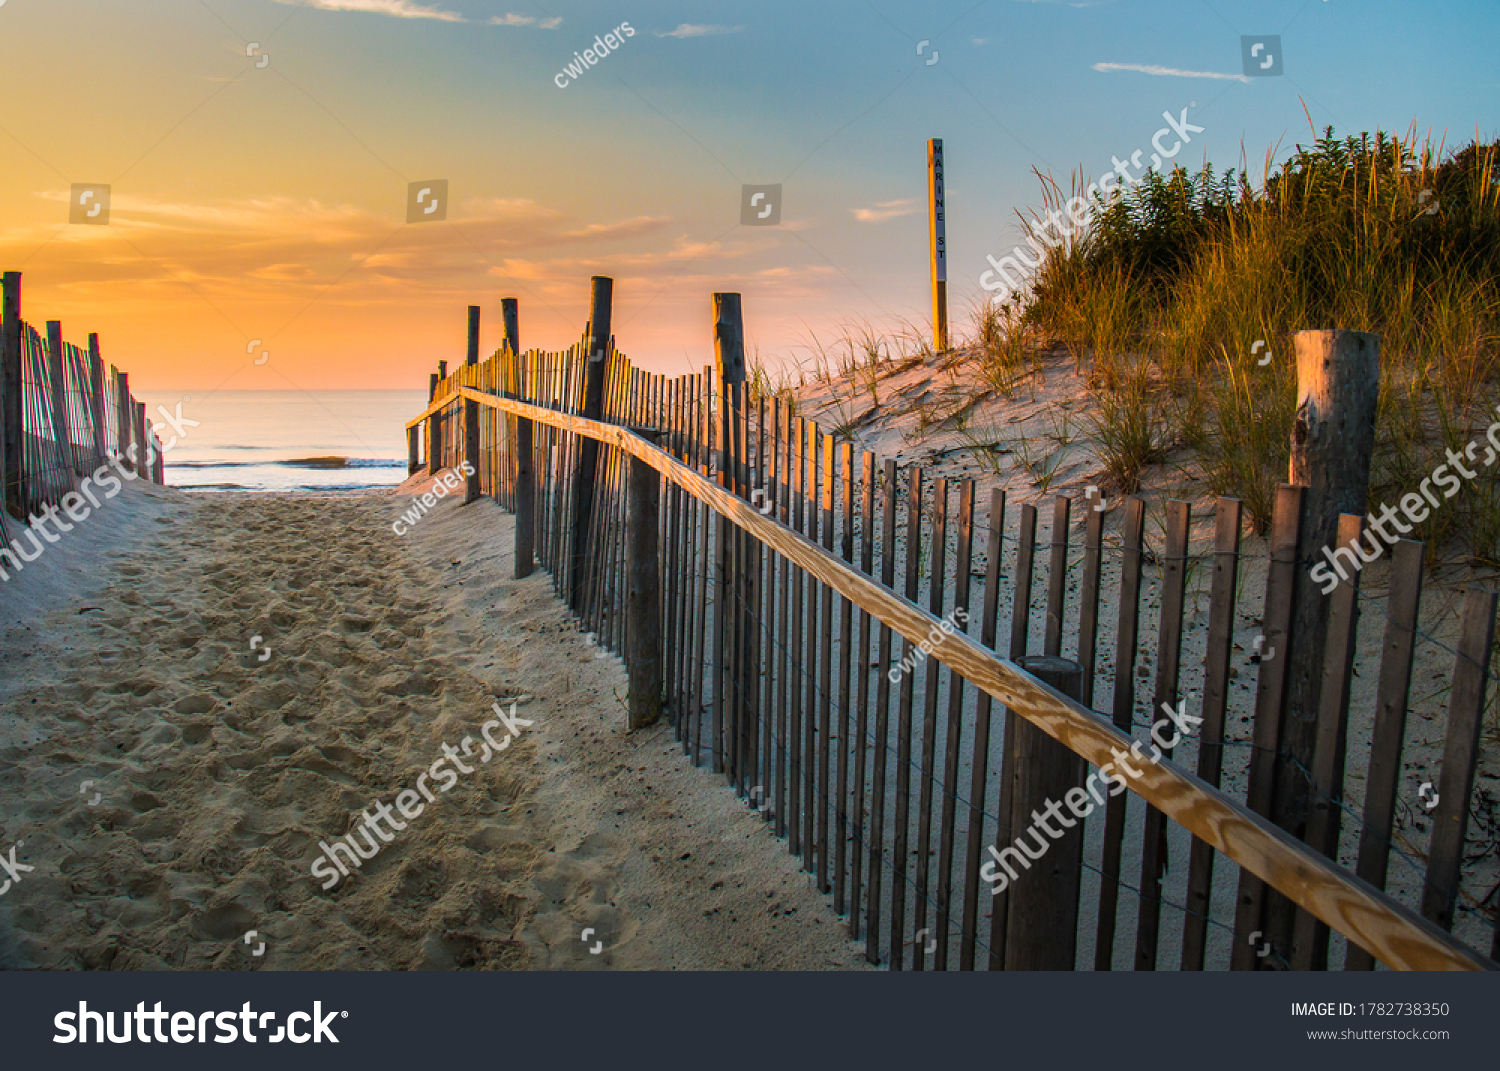 Sunrise glows at the Atlantic seashore at Marine St. in Beach Haven, New Jersey #1782738350